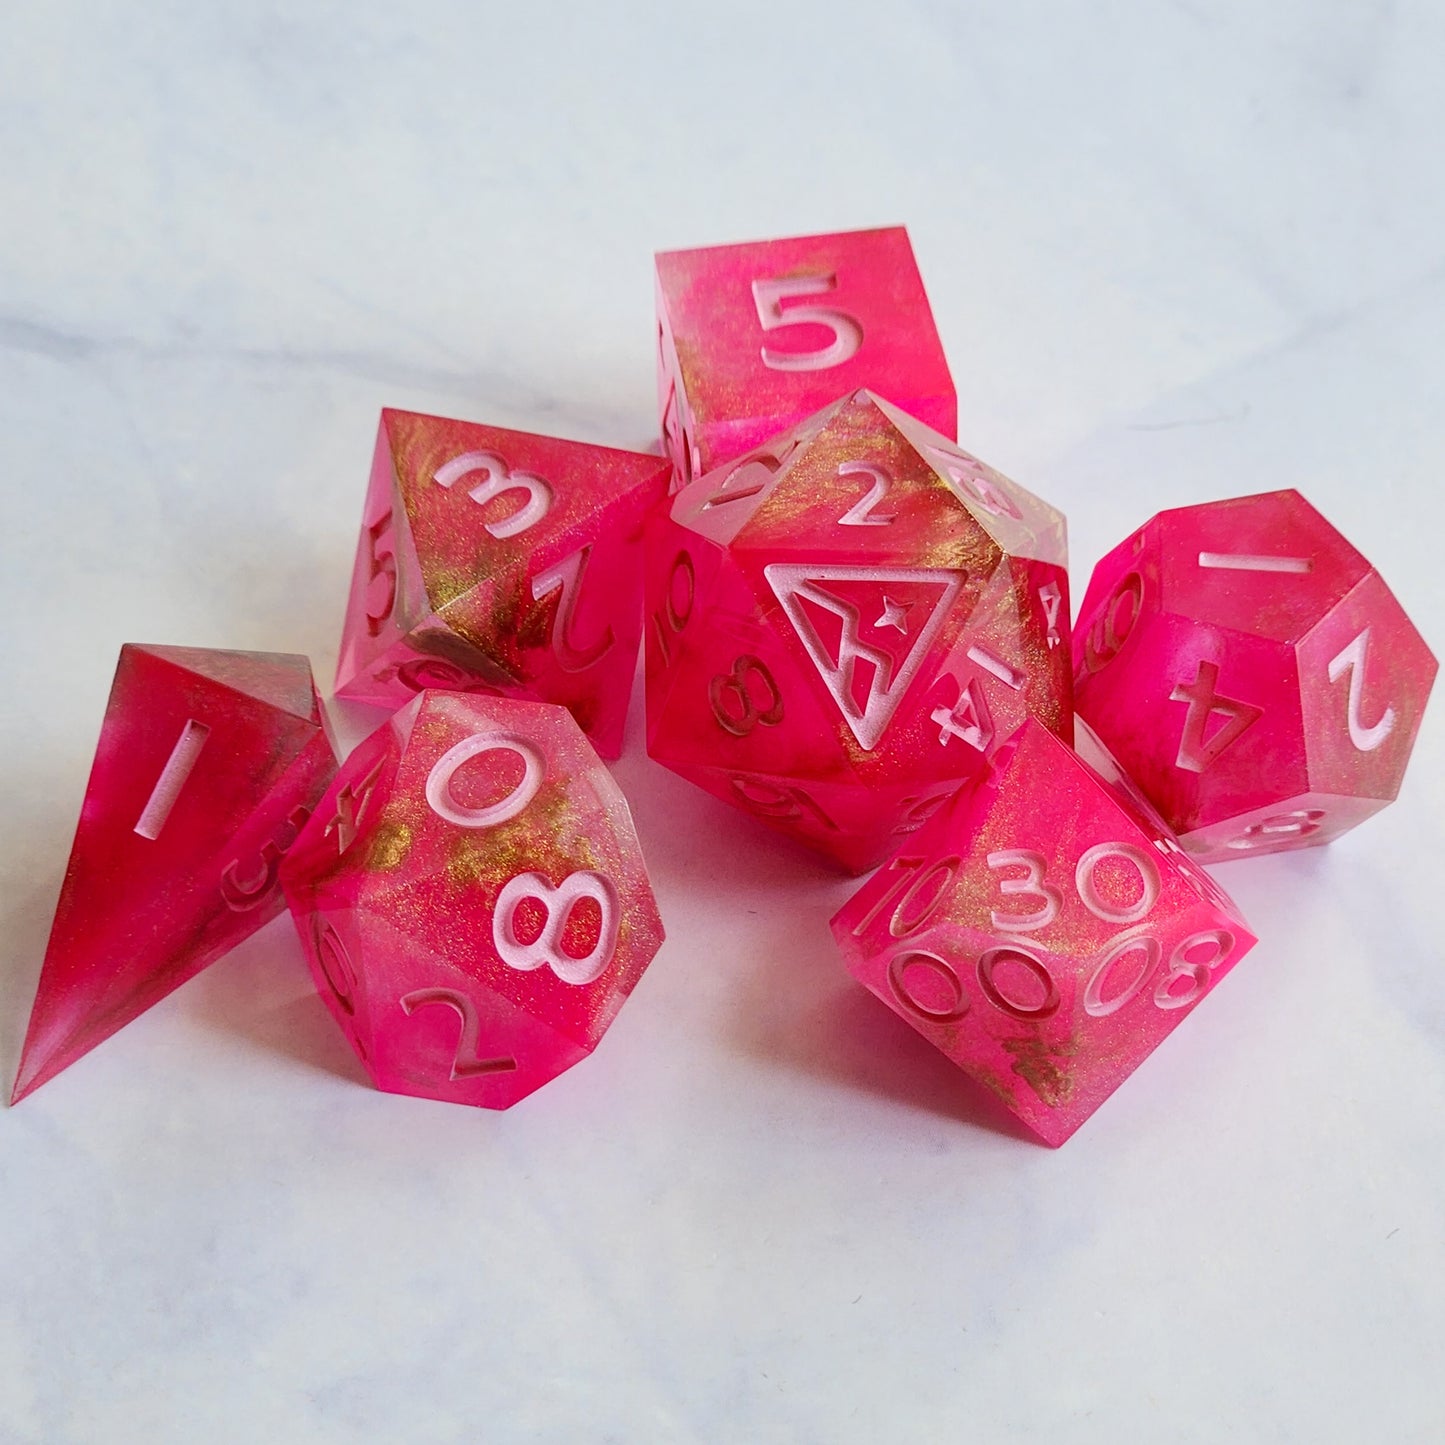 Let's Go Party (In Pink) 7pc Dice Set